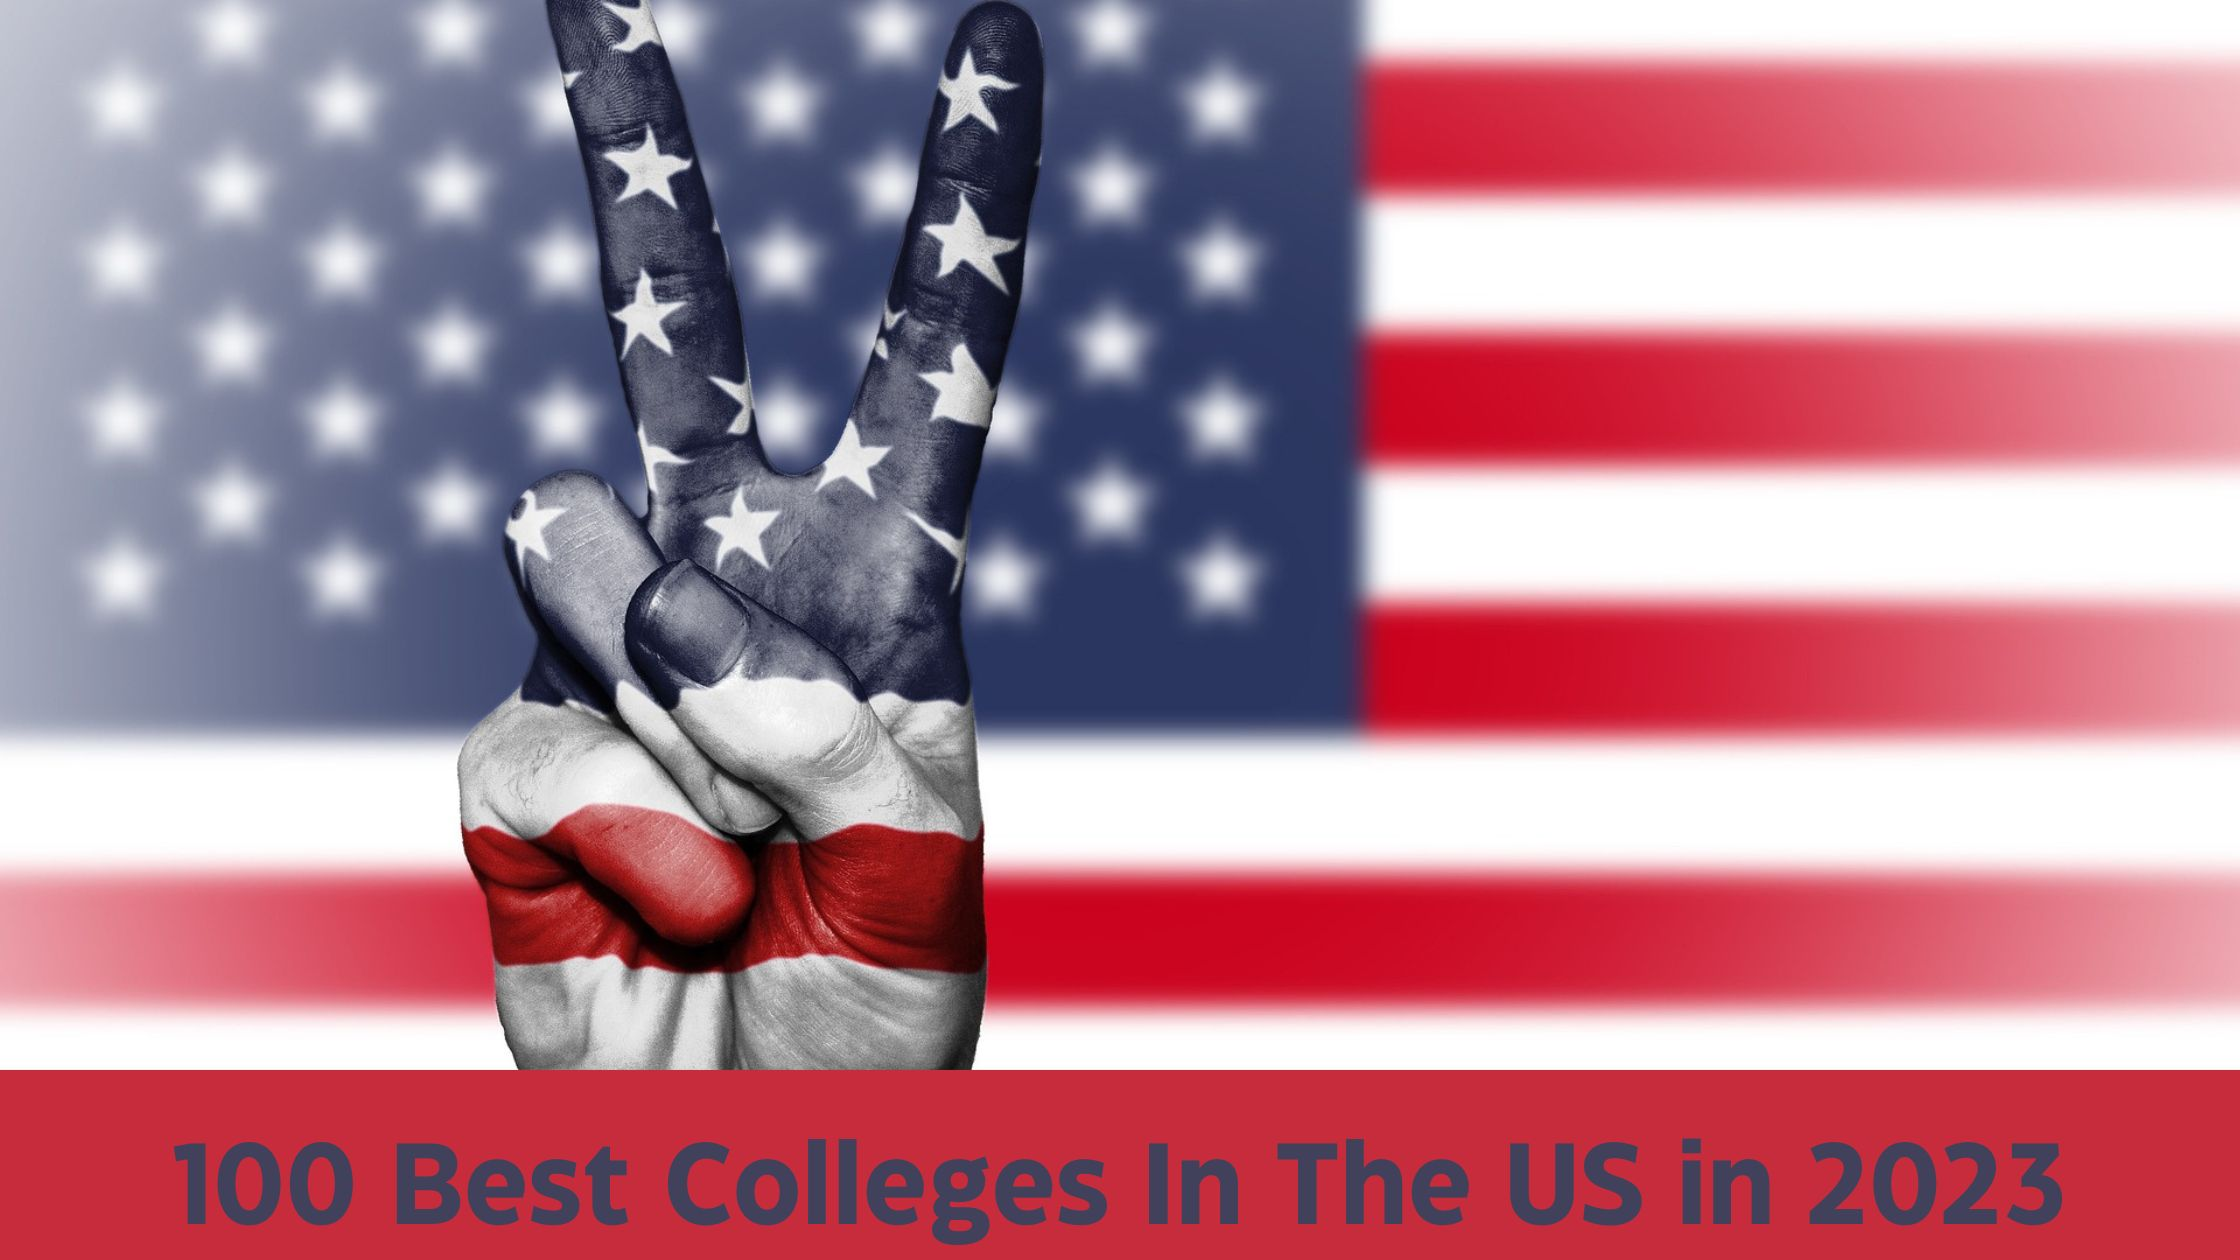 100 Best Colleges In The US in 2023